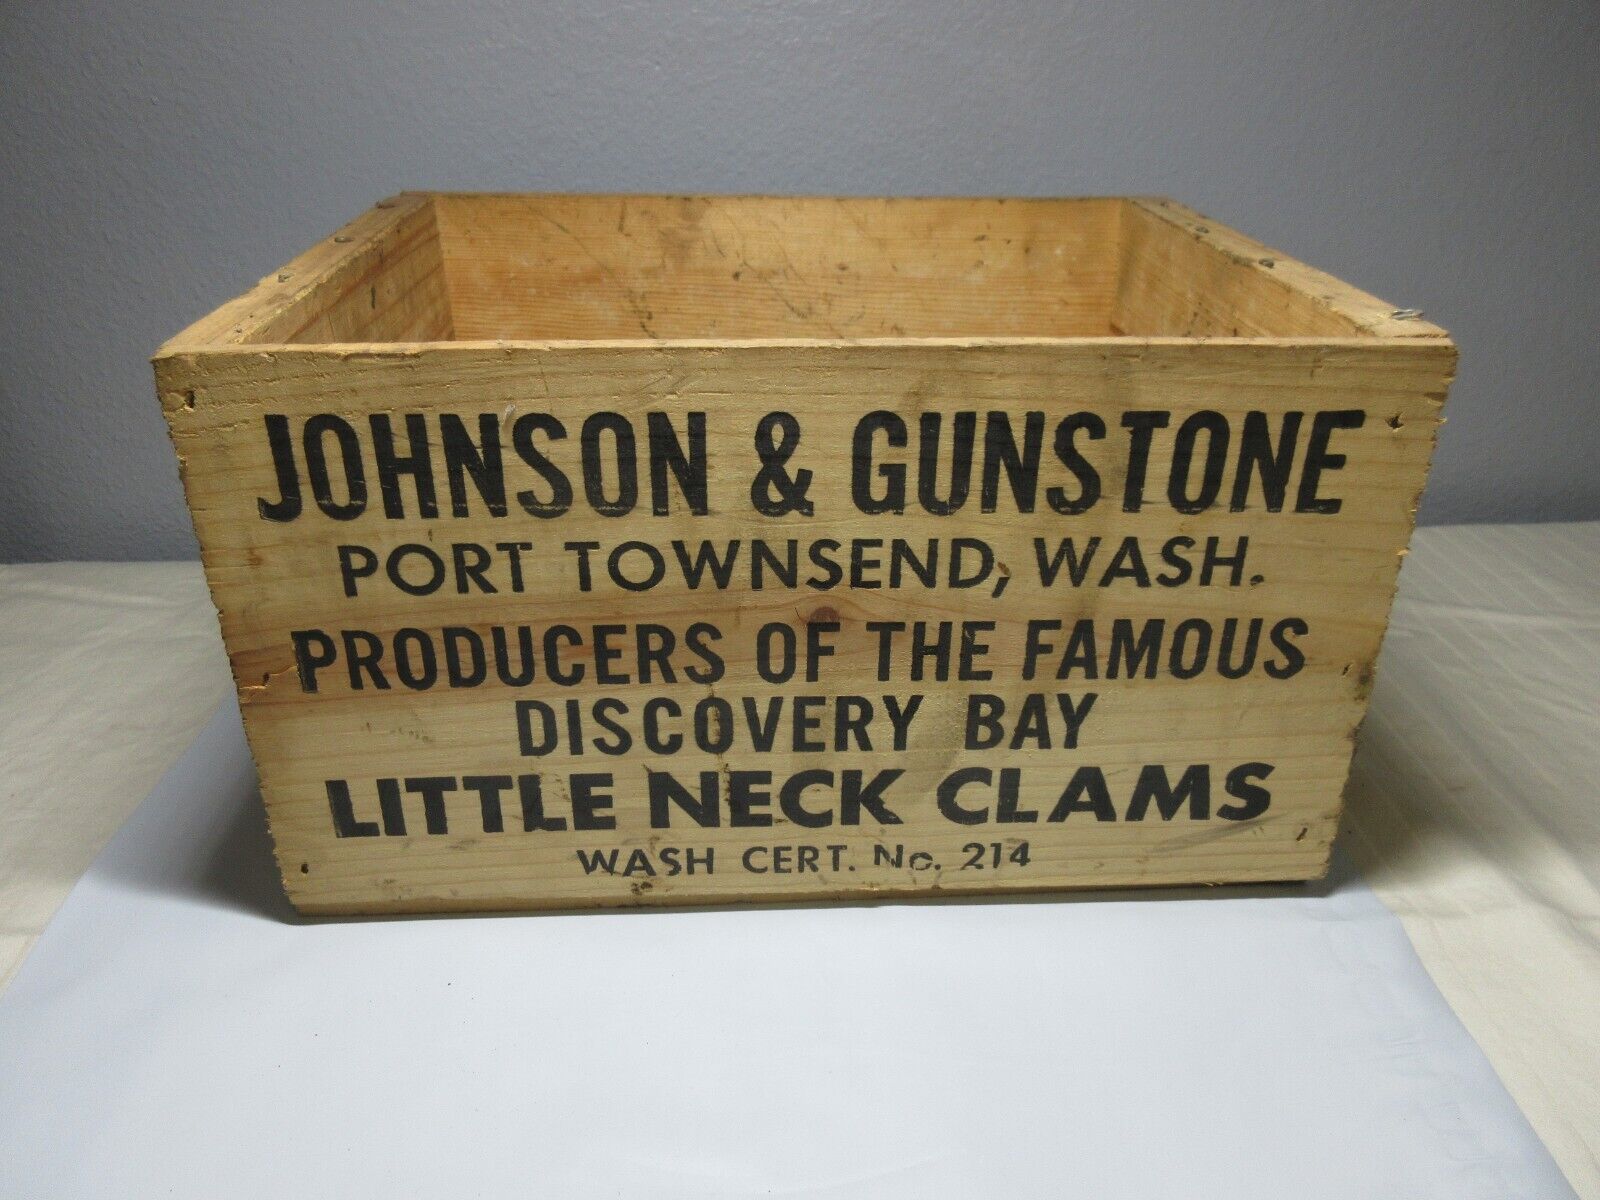 Vintage Johnson & Gunstone Little Neck Clams Wood Crate Box Oyster Port Townsend